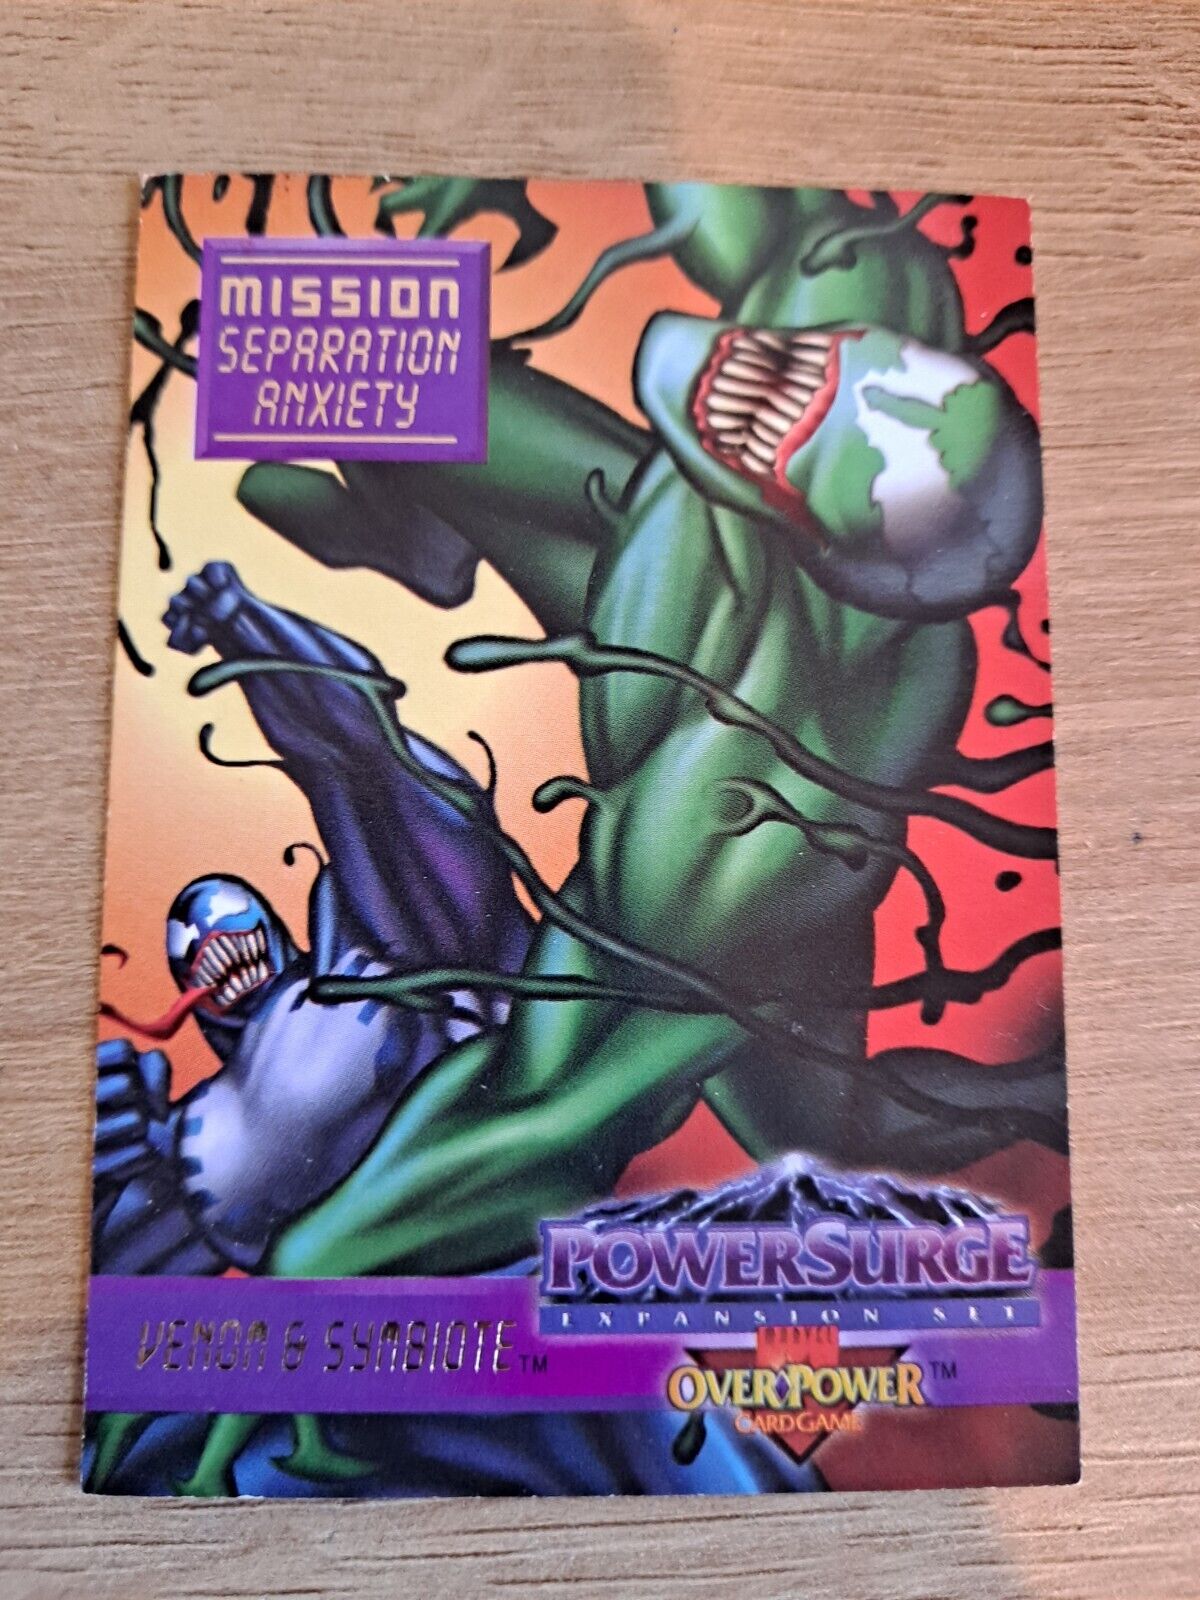 1995 MARVEL OVERPOWER POWERSURGE SEPERATION ANXIETY MISSION CARD #5 VENOM